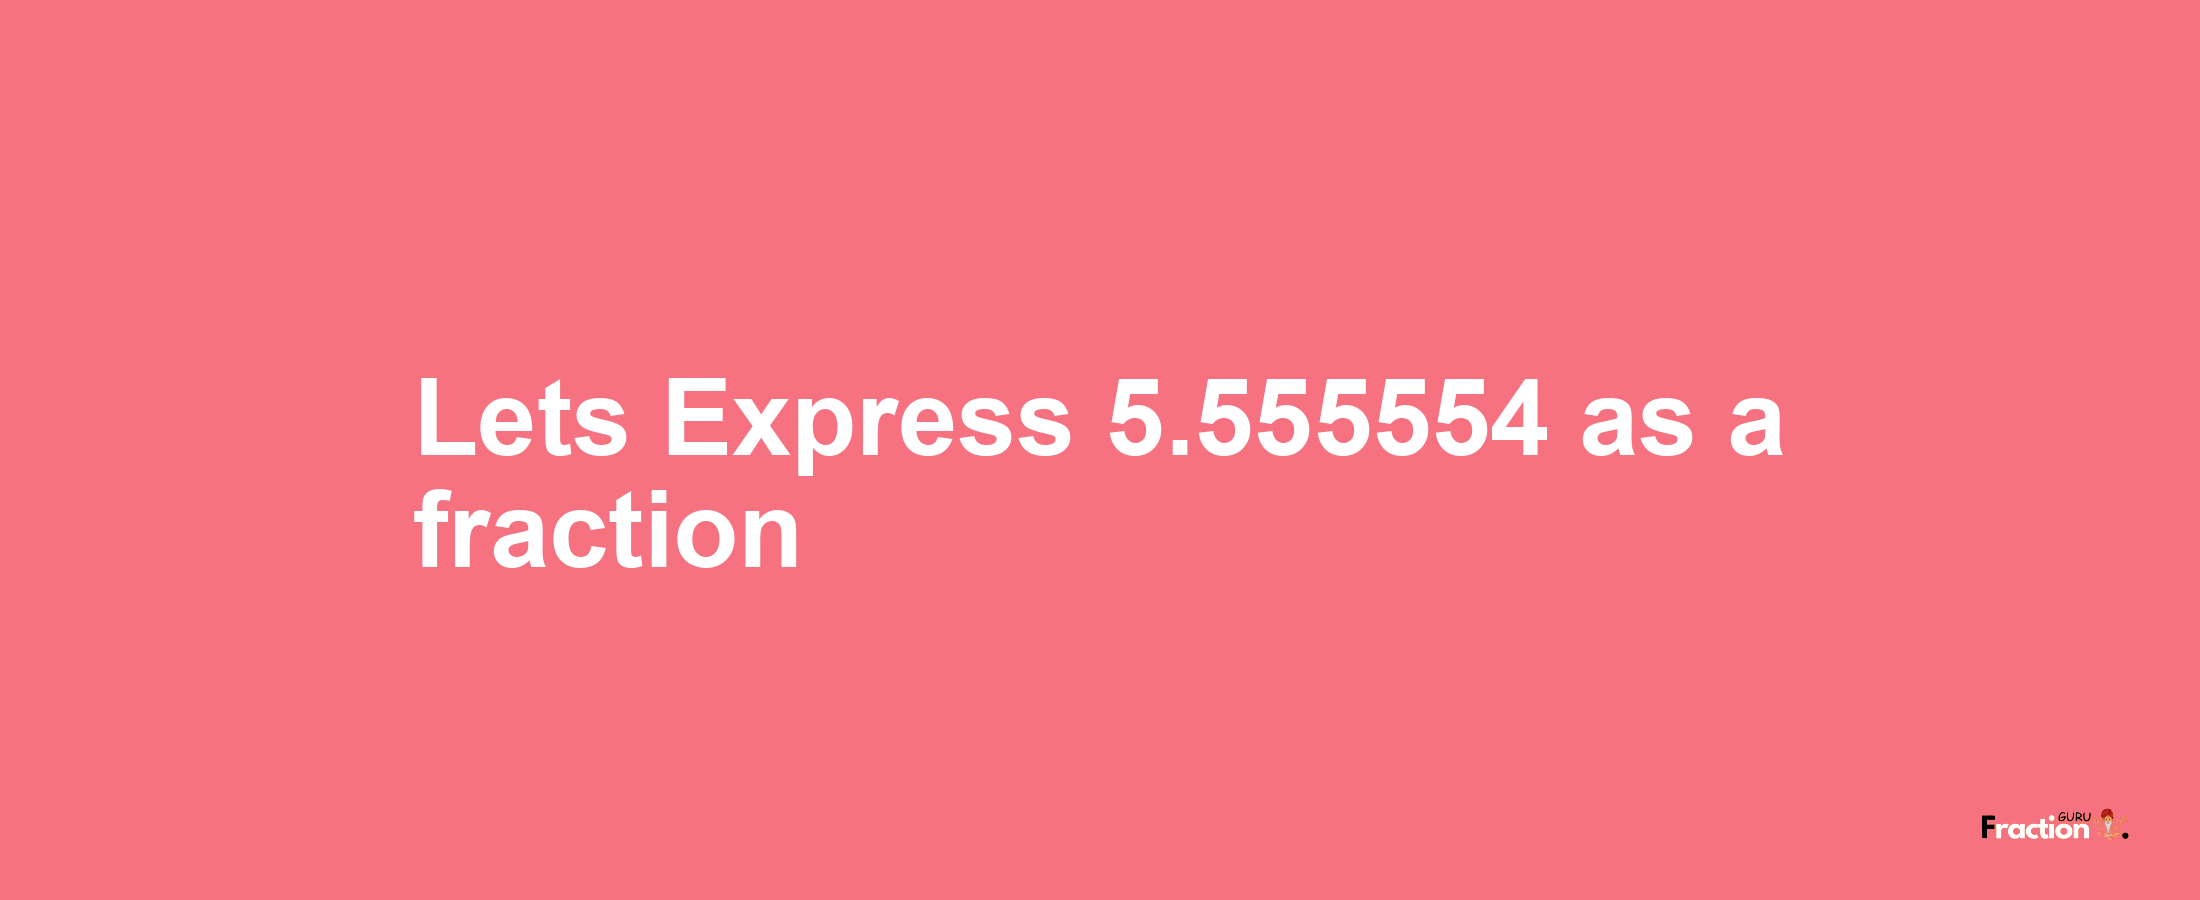 Lets Express 5.555554 as afraction